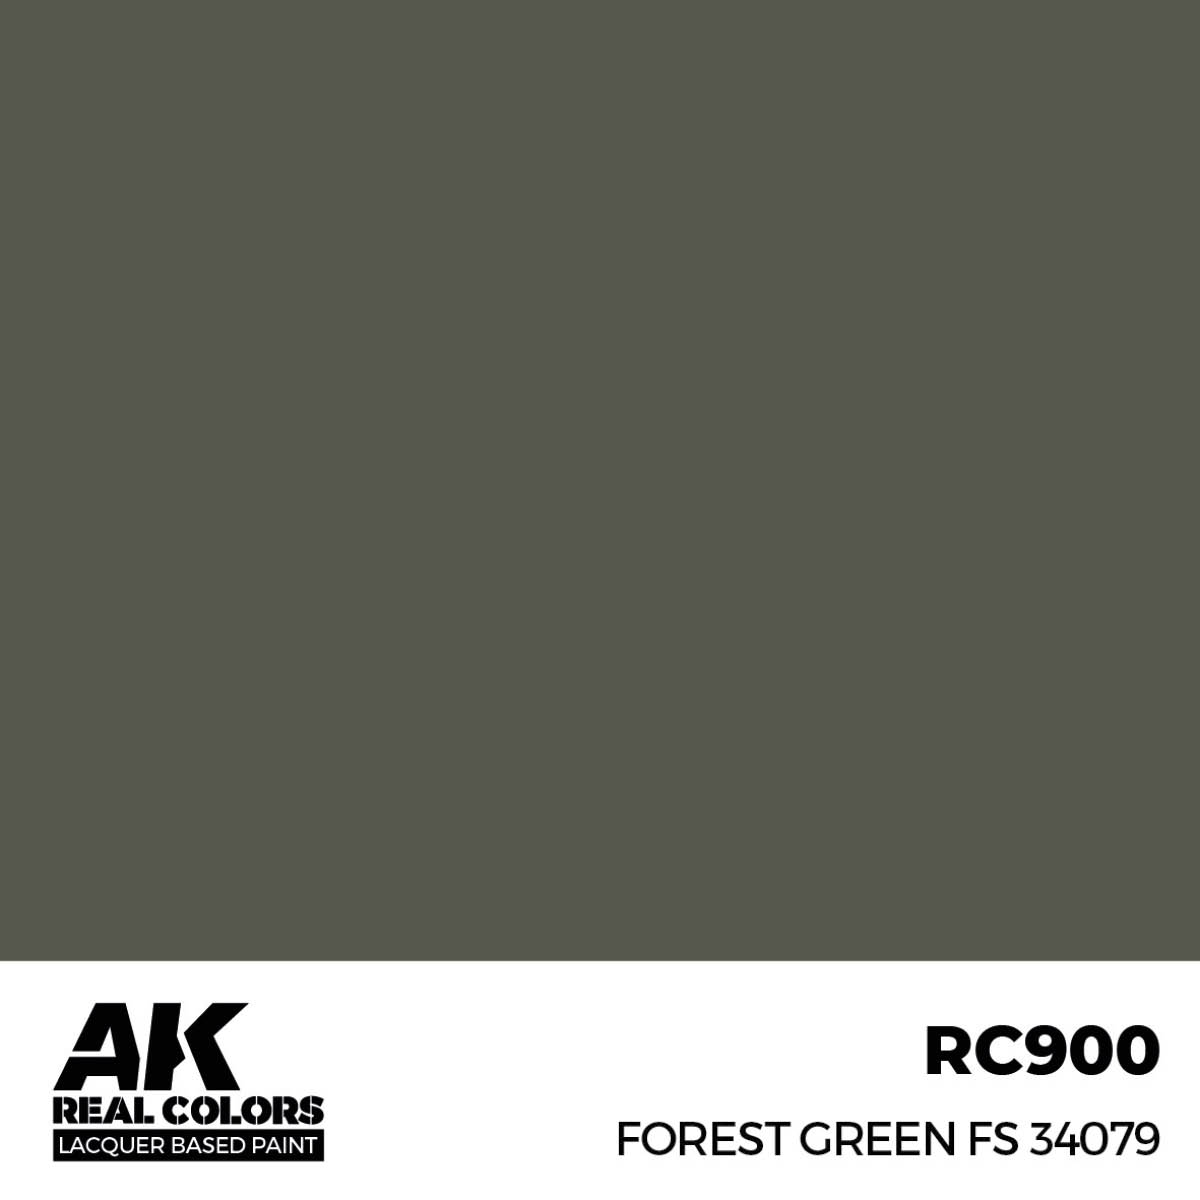 Forest Green FS 34079